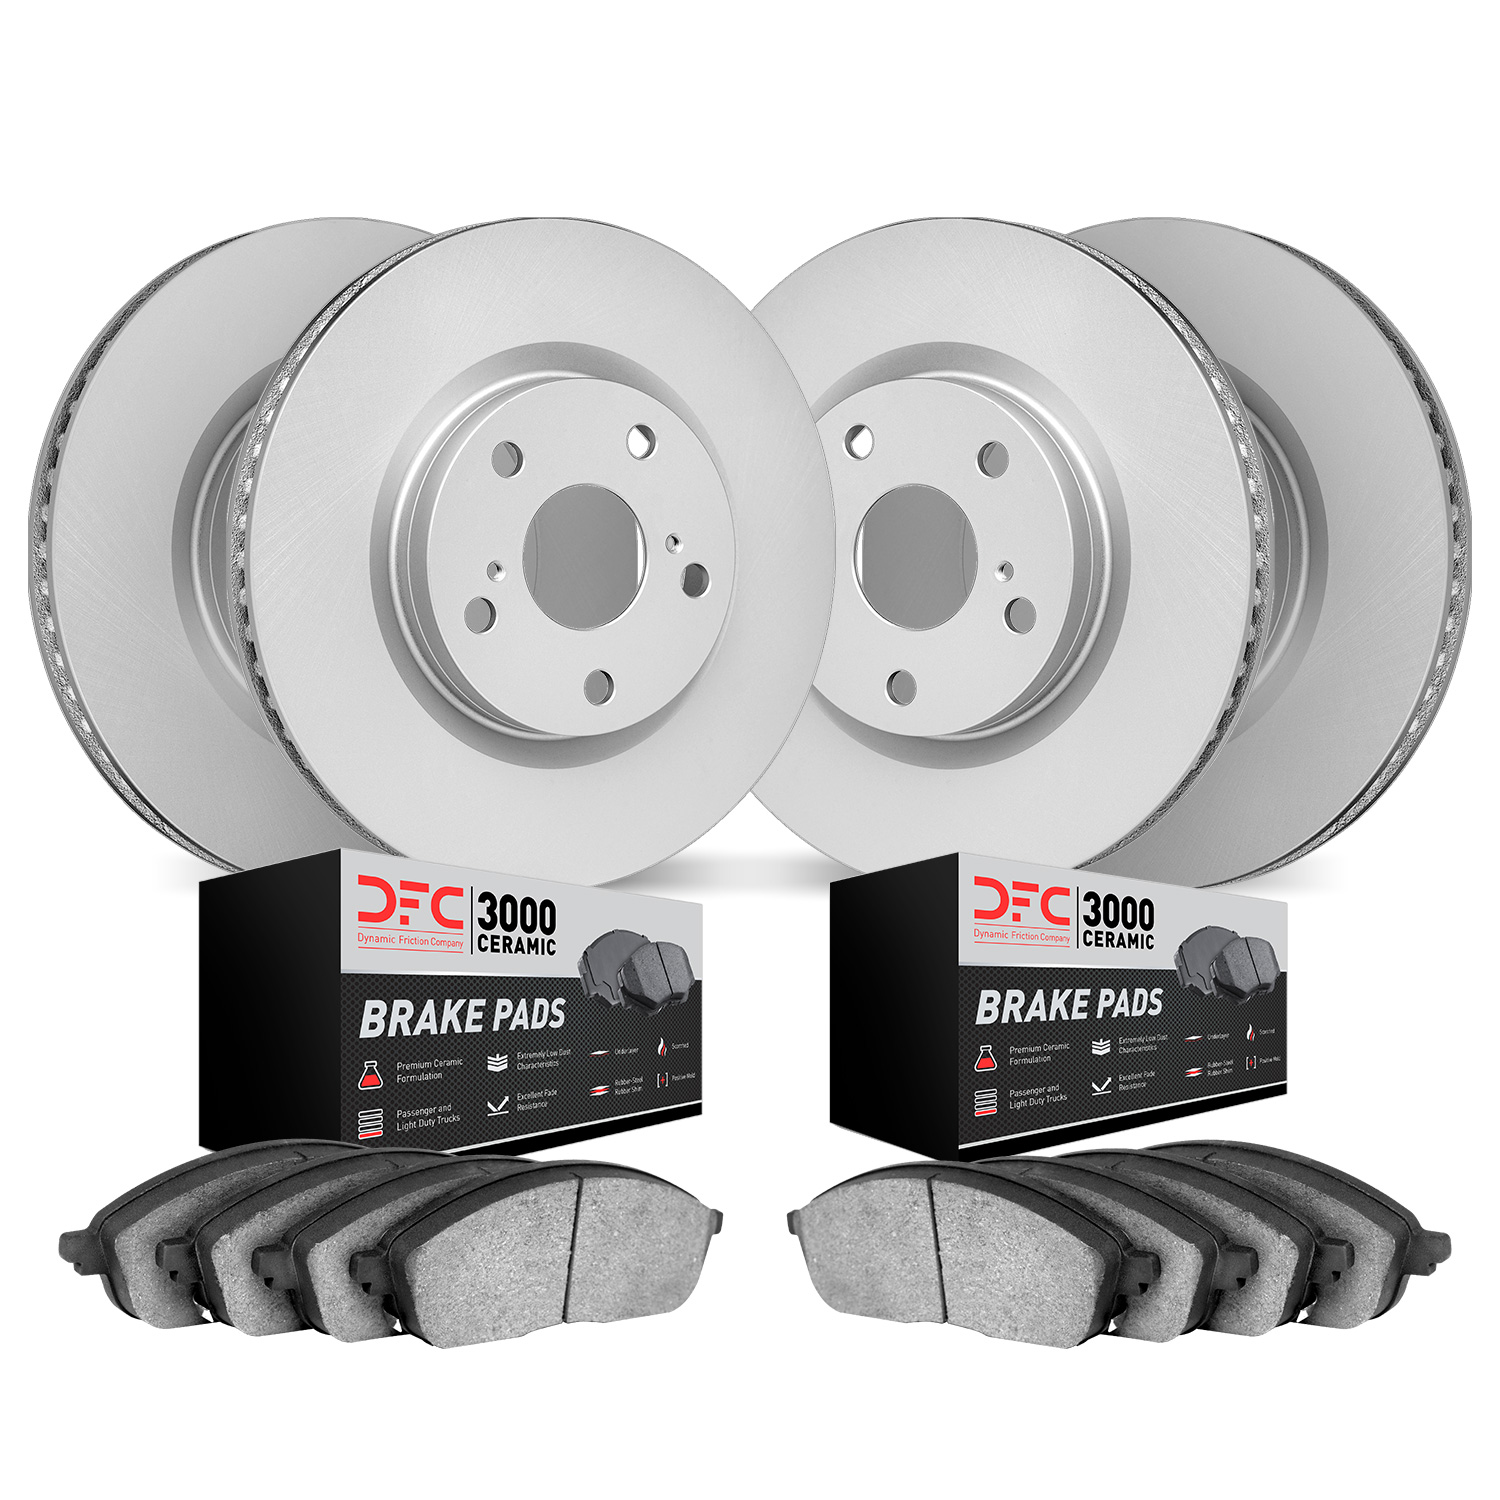 4304-67005 Geospec Brake Rotors with 3000-Series Ceramic Brake Pads Kit, 2004-2017 Infiniti/Nissan, Position: Front and Rear